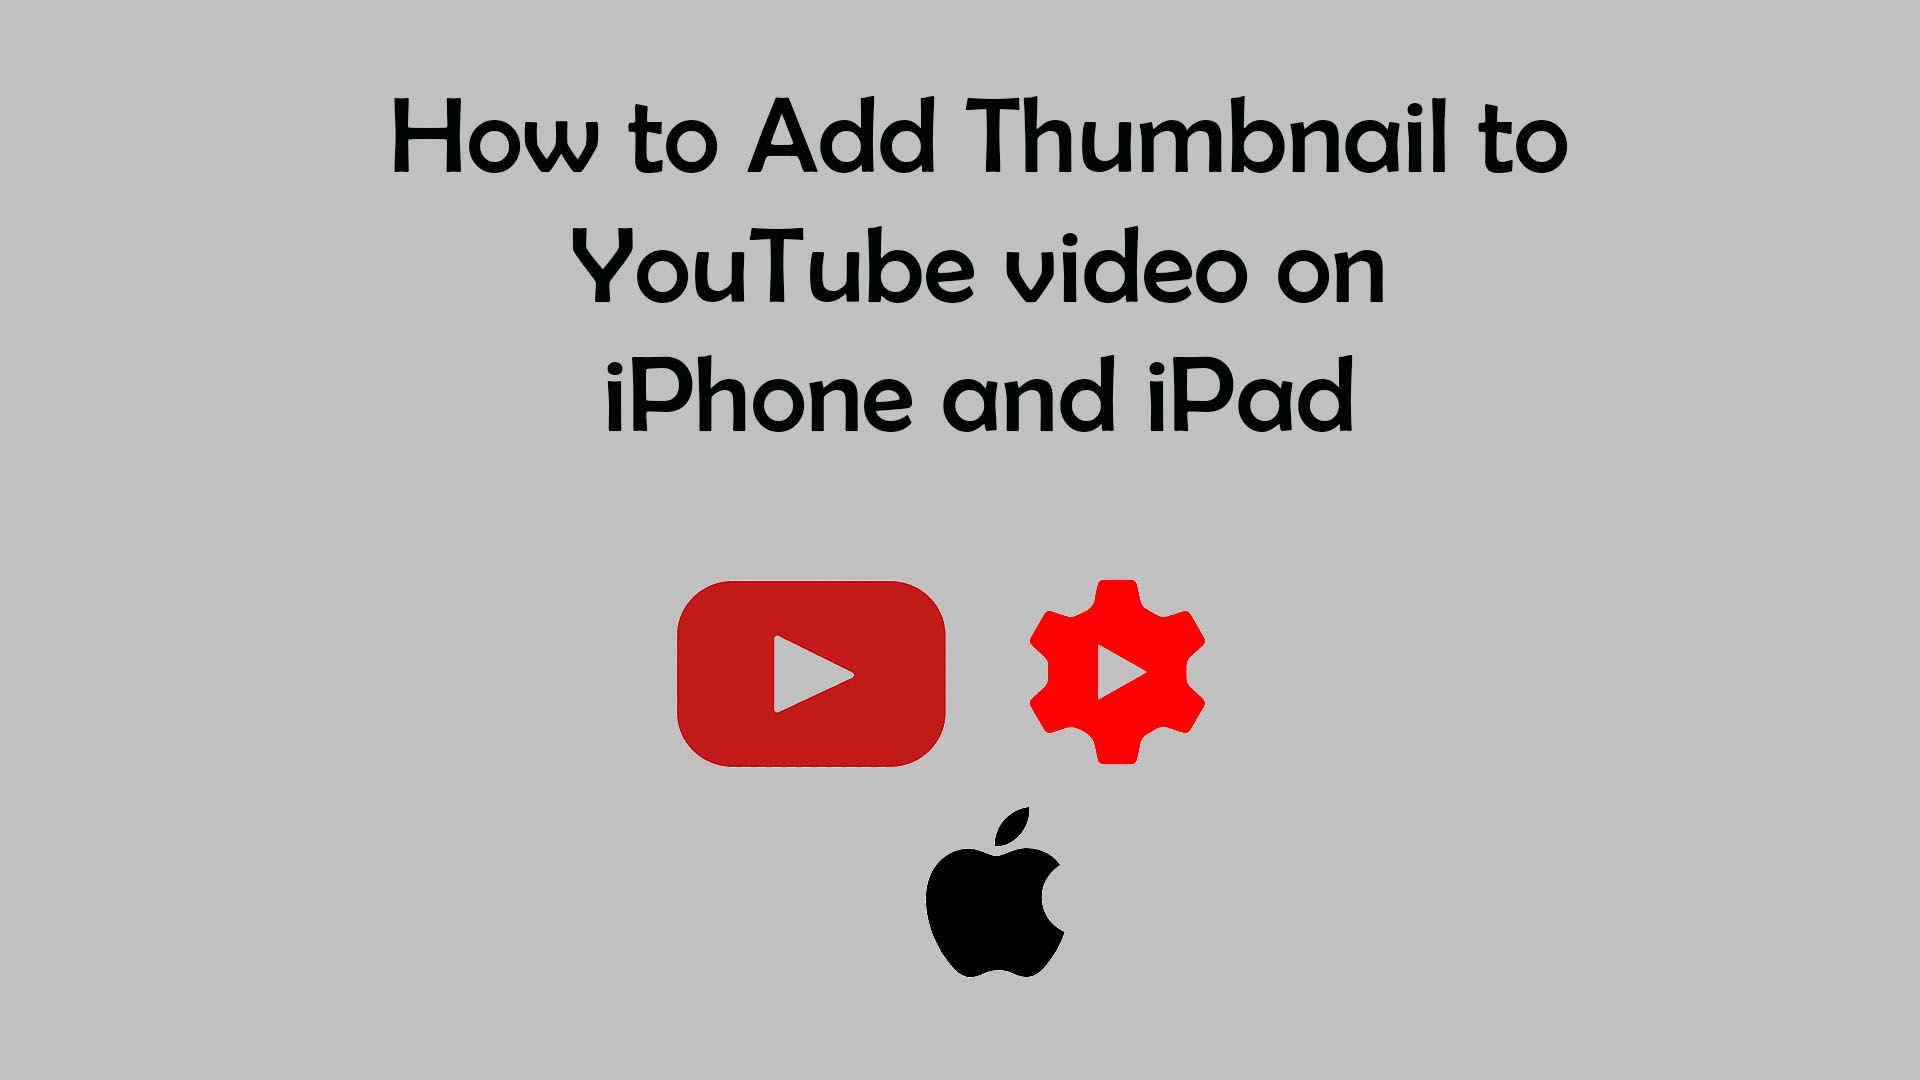 How to add thumbnail to YouTube video on iPhone